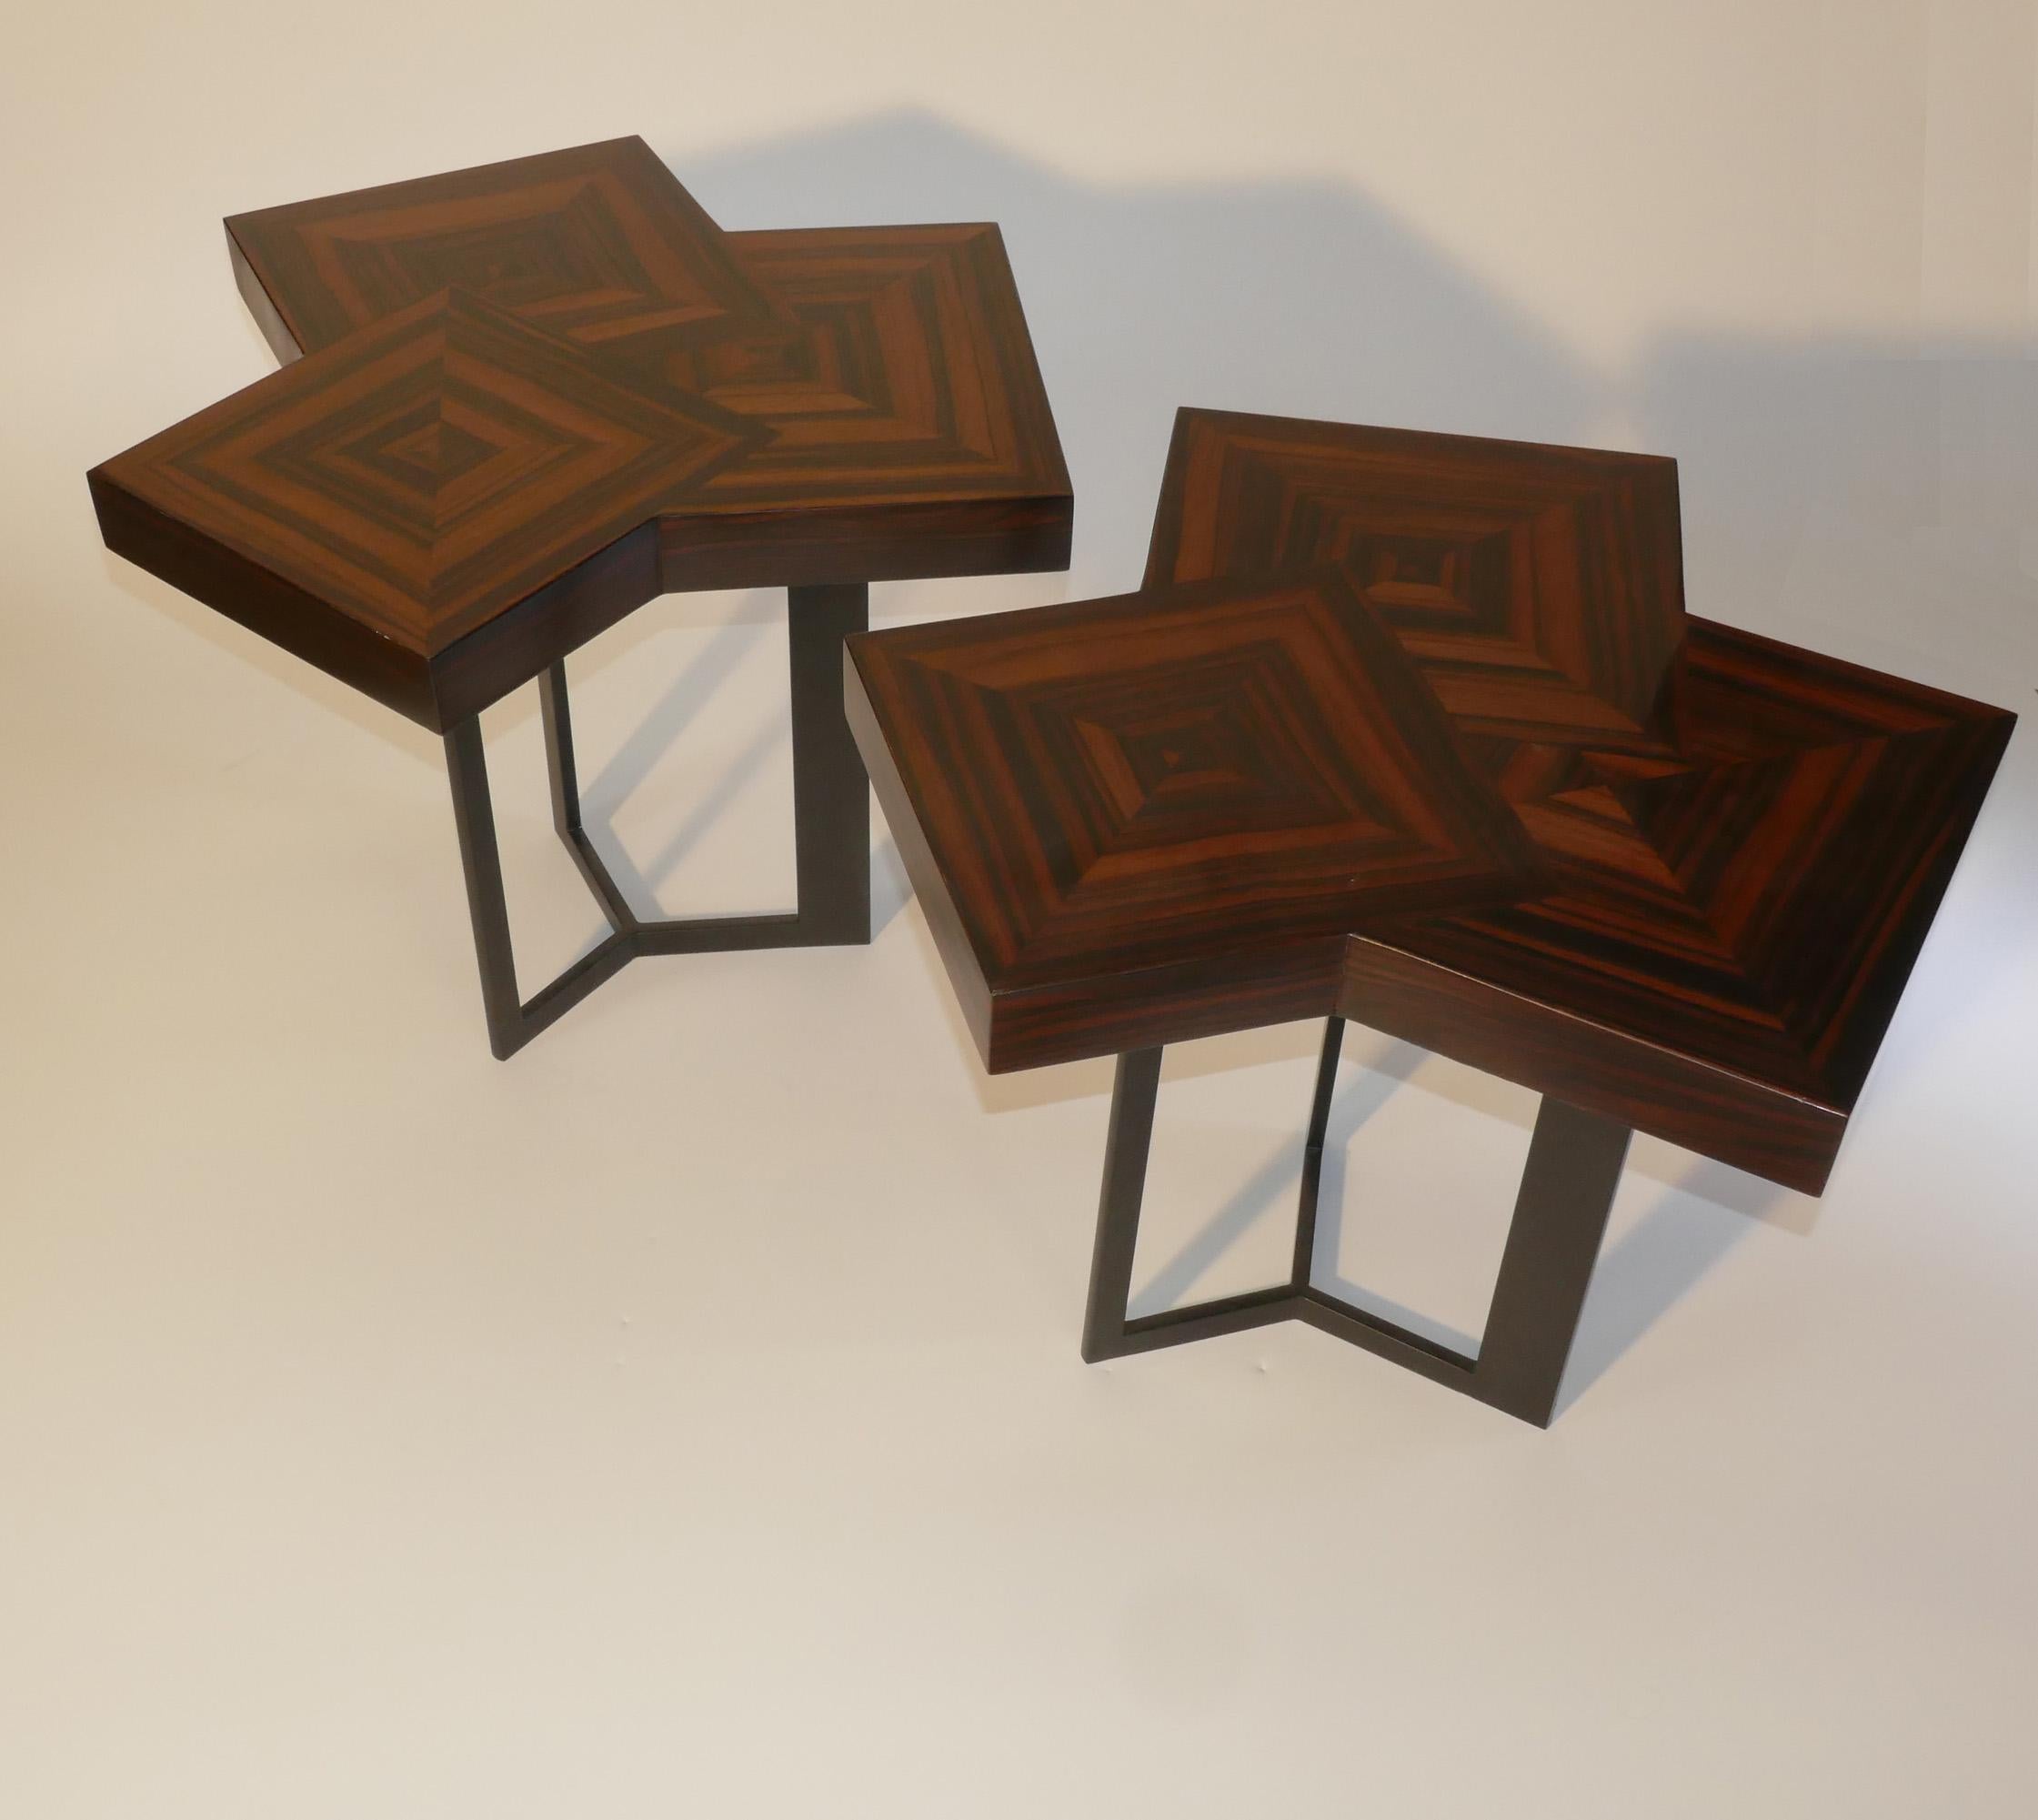 Tow coffee end table in Macassar ebony marquetry. The leg is in satin black metal.
This set can also be custom made.
PLease ask for a shipping quote to get the best offer.
   